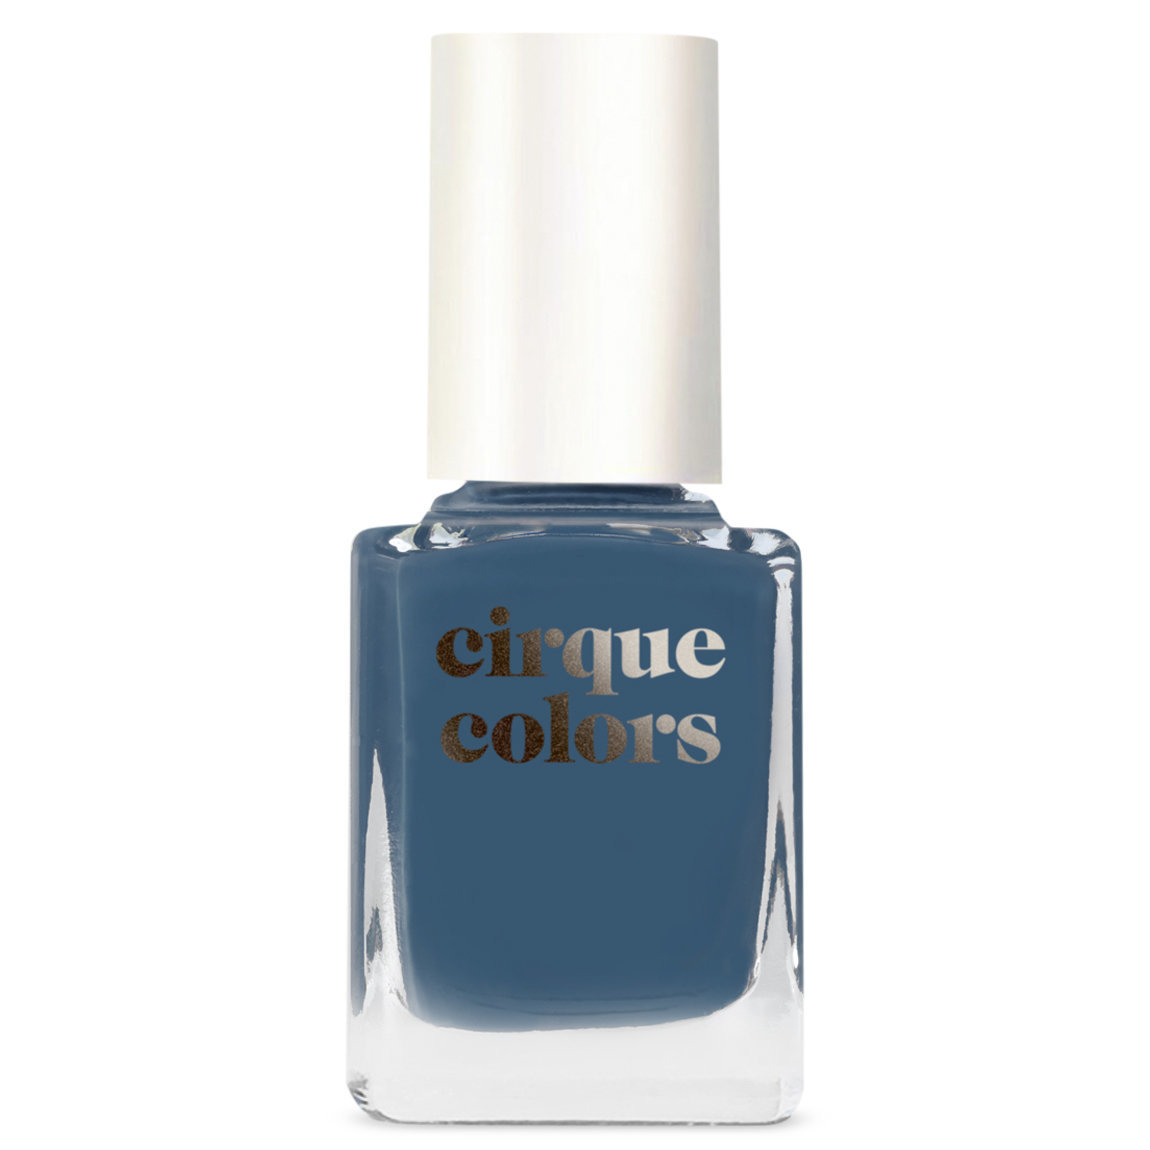 Cirque Colors Jelly Nail Polish Navy Jelly alternative view 1 - product swatch.